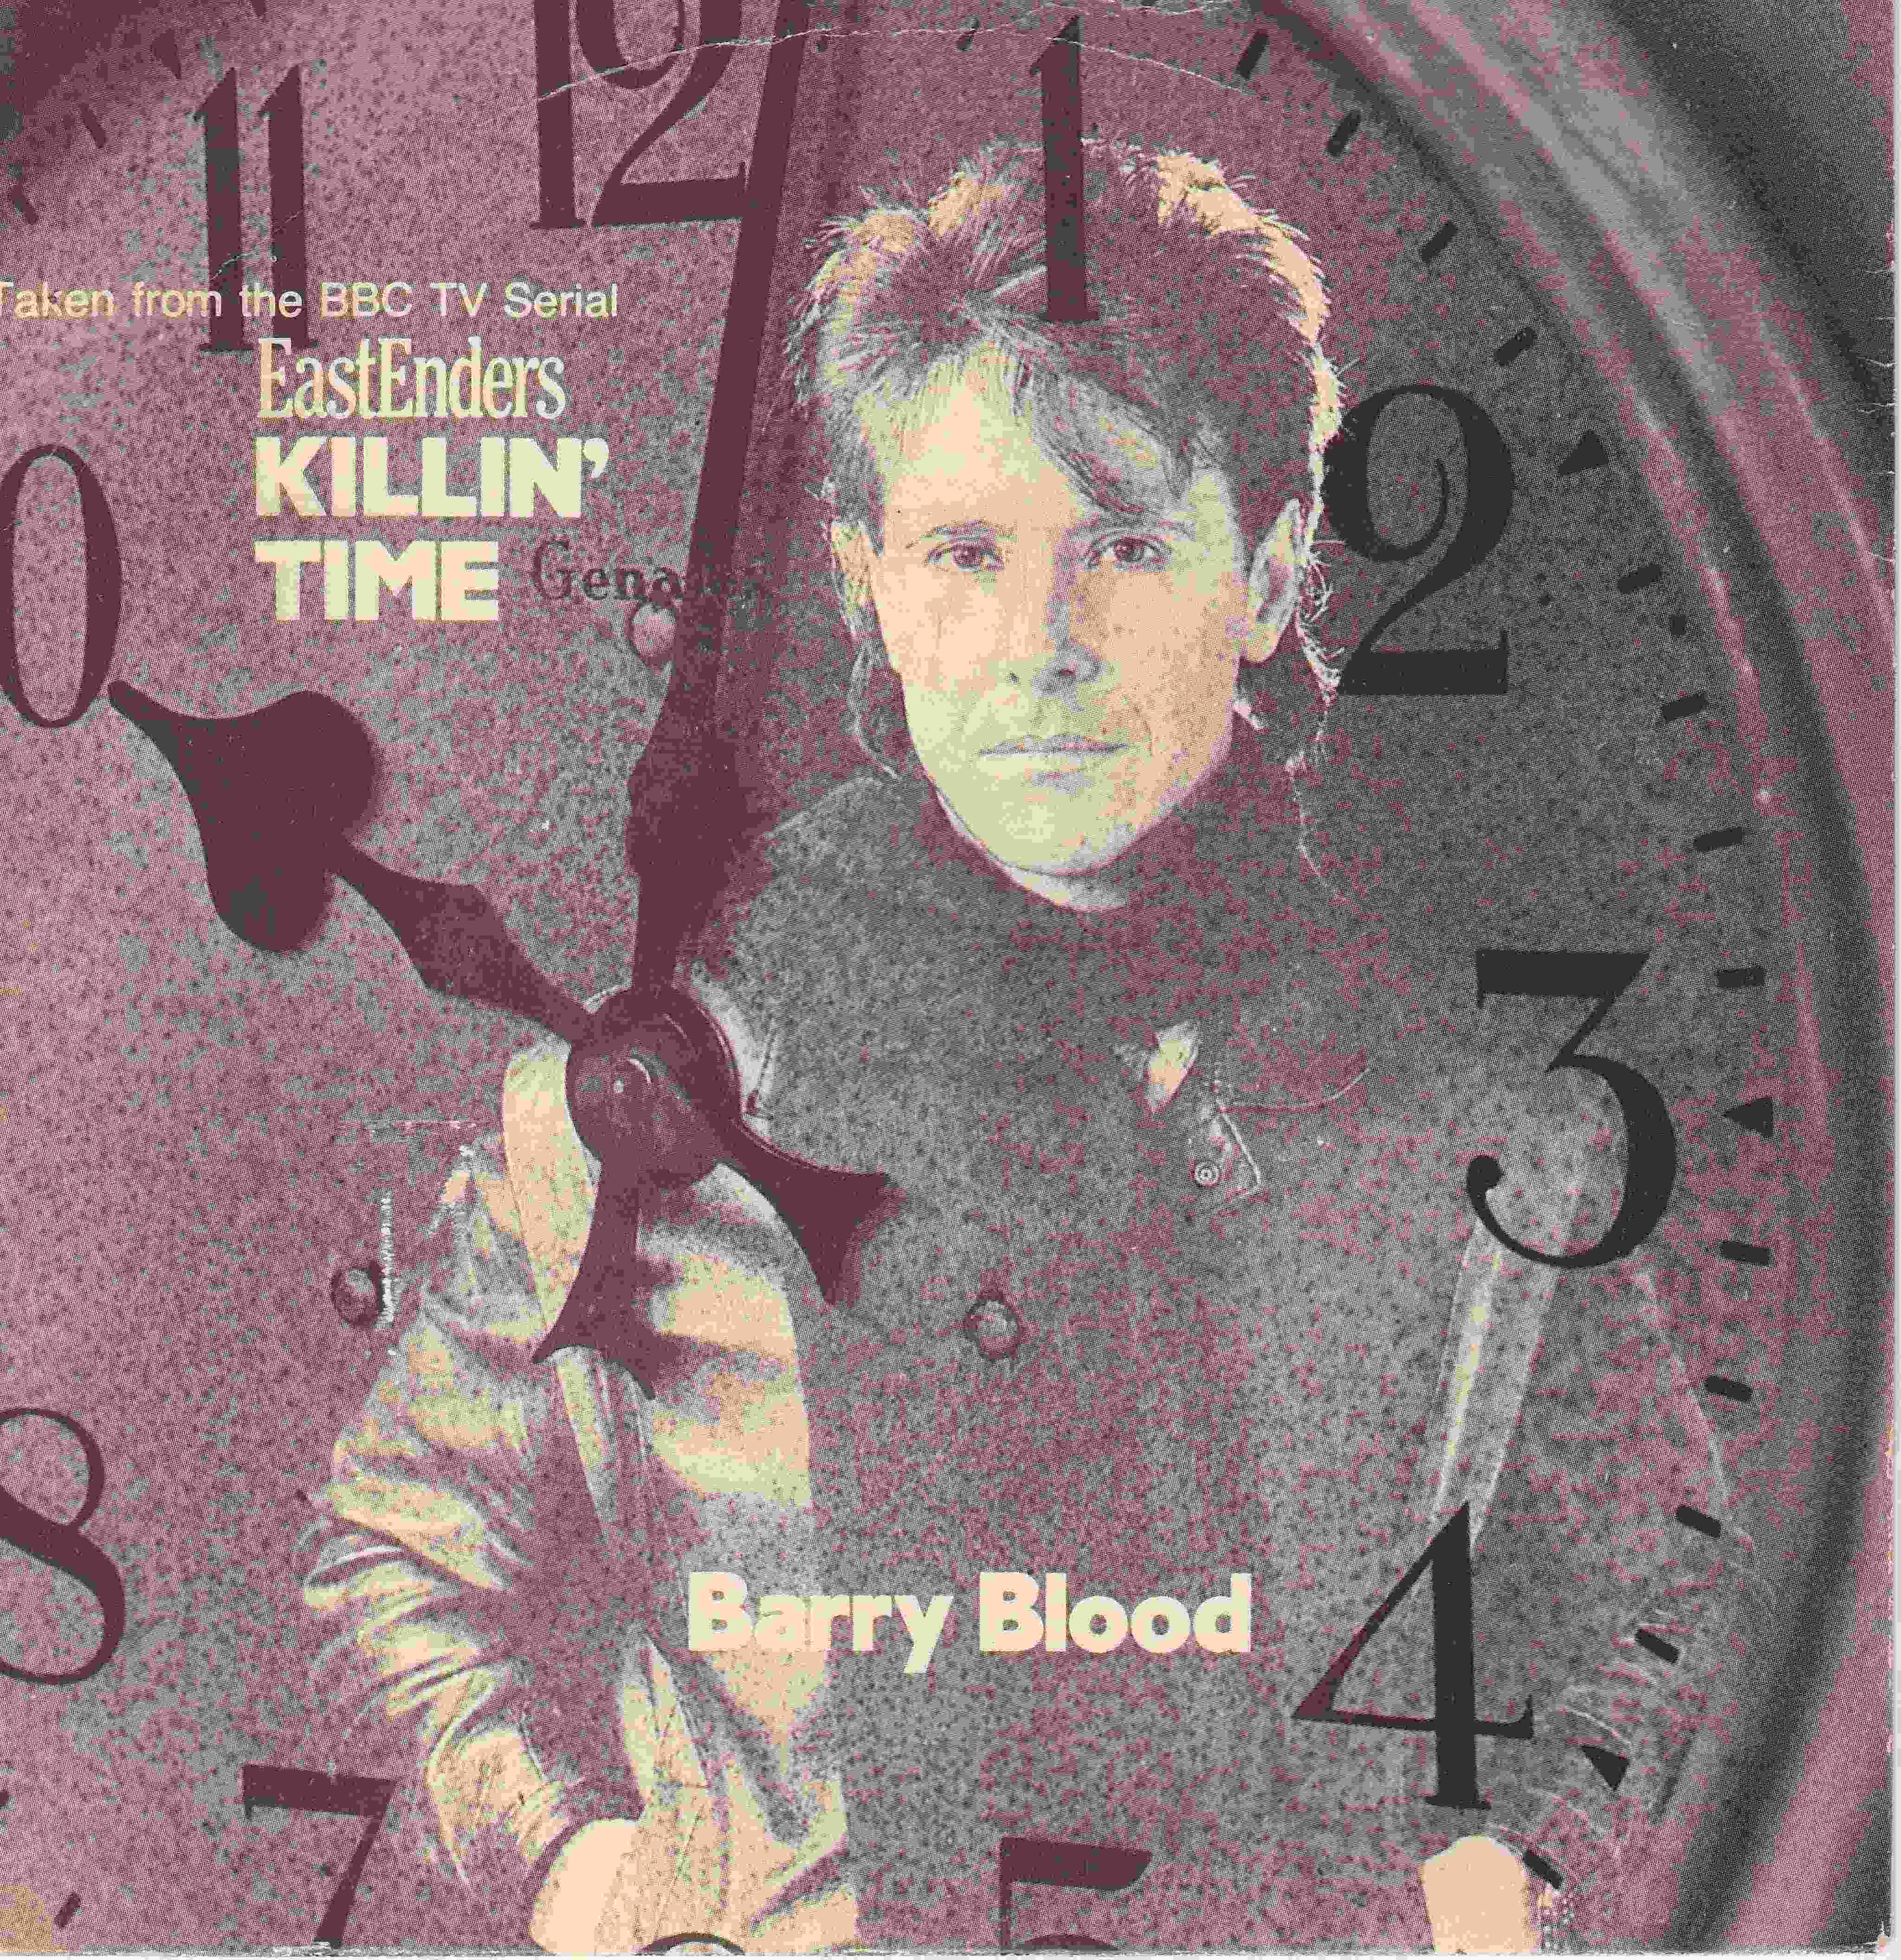 Picture of RESL 168 Killin' time (EastEnders) by artist Barry Blood from the BBC singles - Records and Tapes library